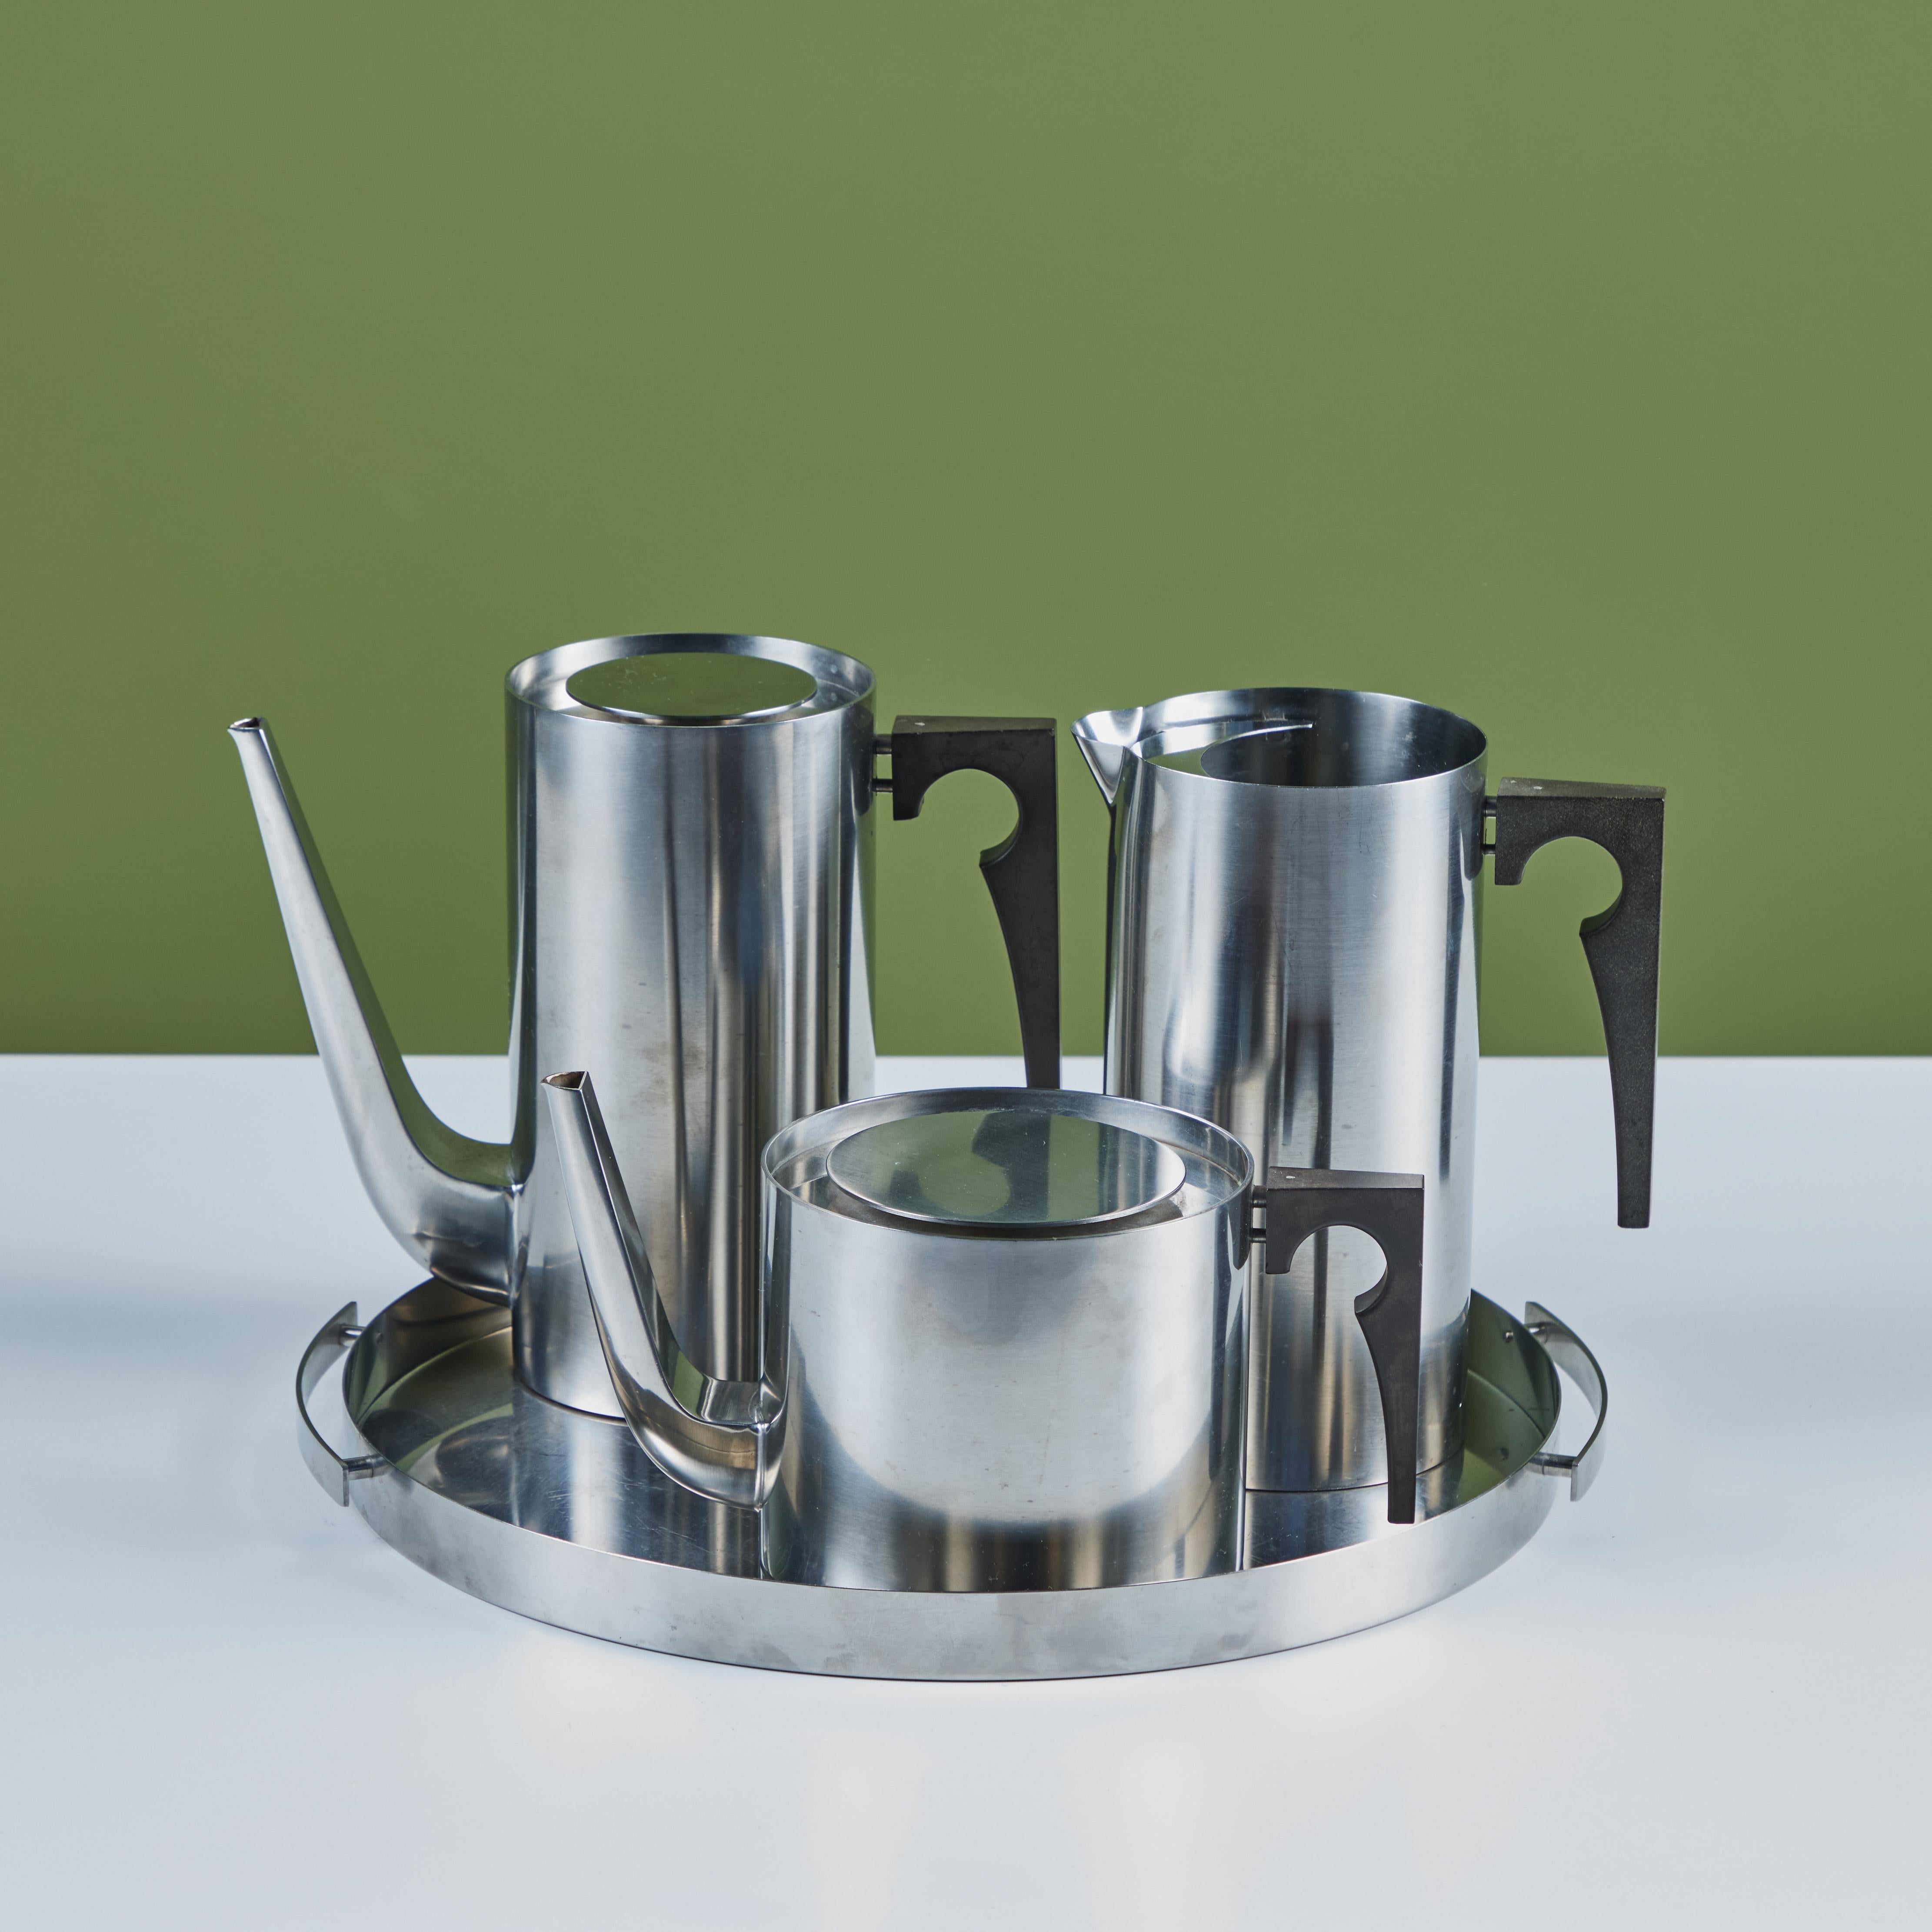 Mid-20th Century Arne Jacobsen Four Piece Stainless Steel Danish Coffee/Tea Set for Stelton For Sale